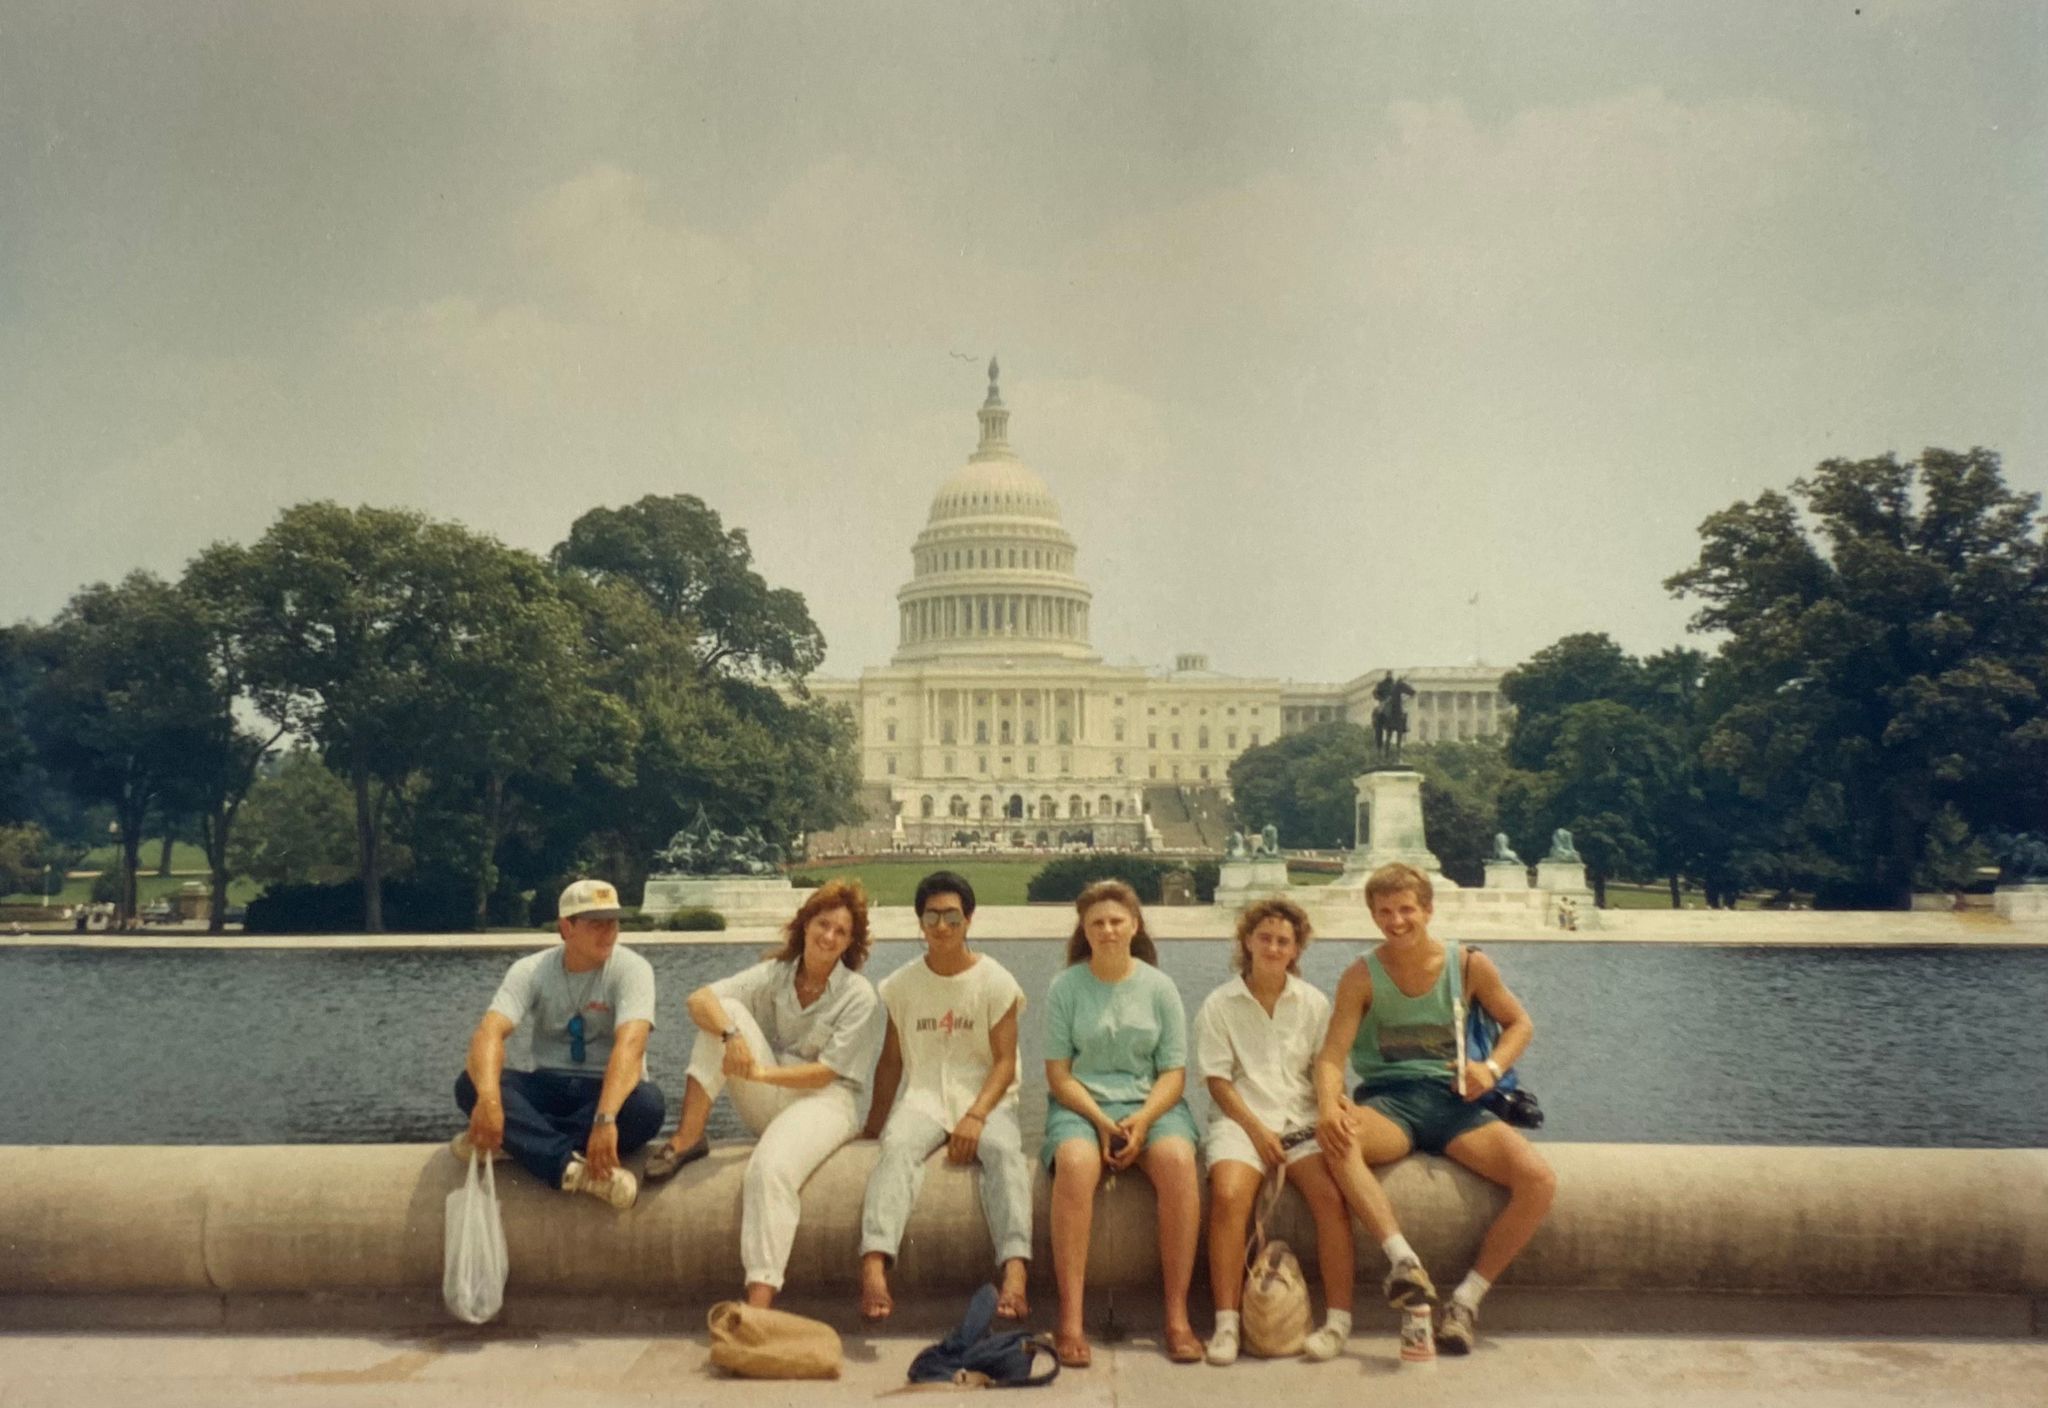 A group of young people sitting in front of the US Senate building